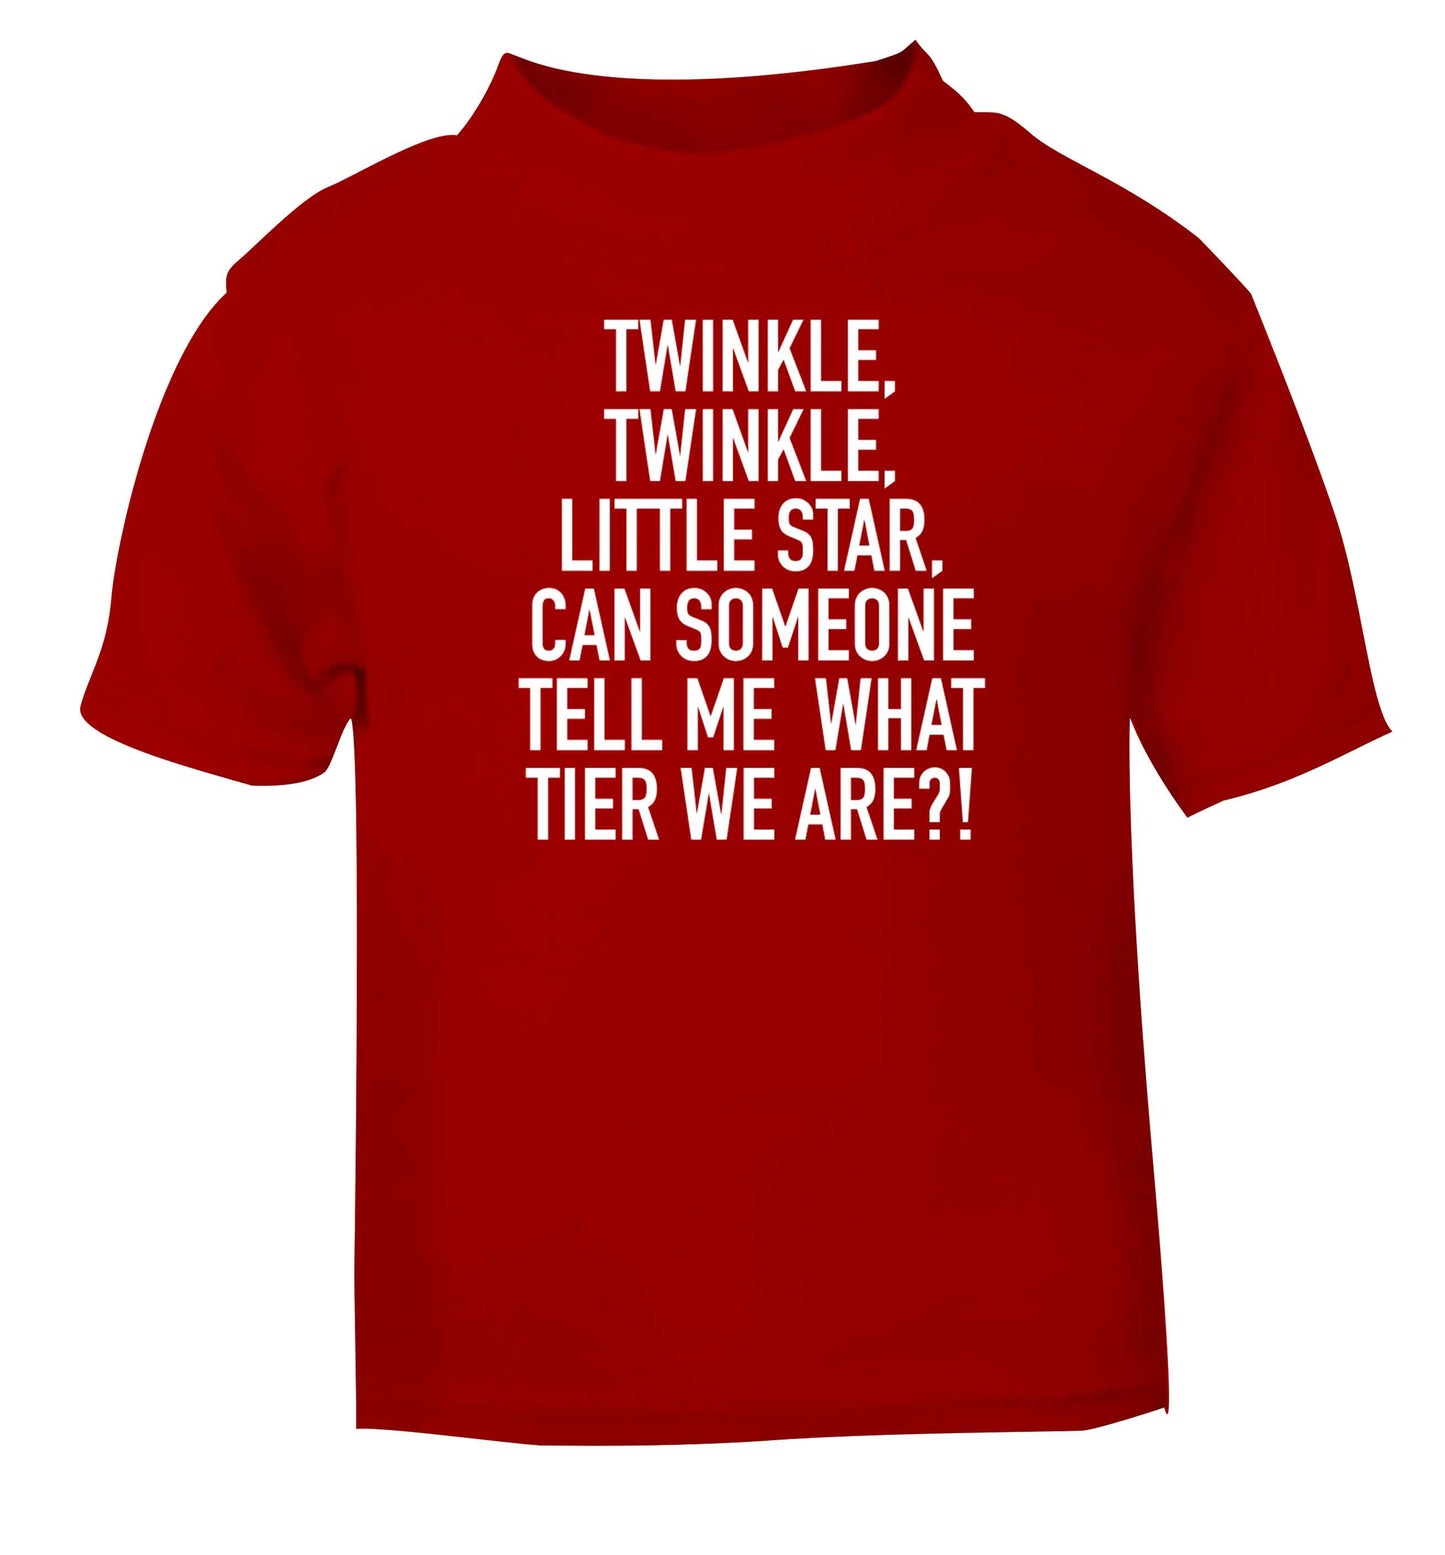 Twinkle twinkle, little star does anyone know what tier we are? red baby toddler Tshirt 2 Years